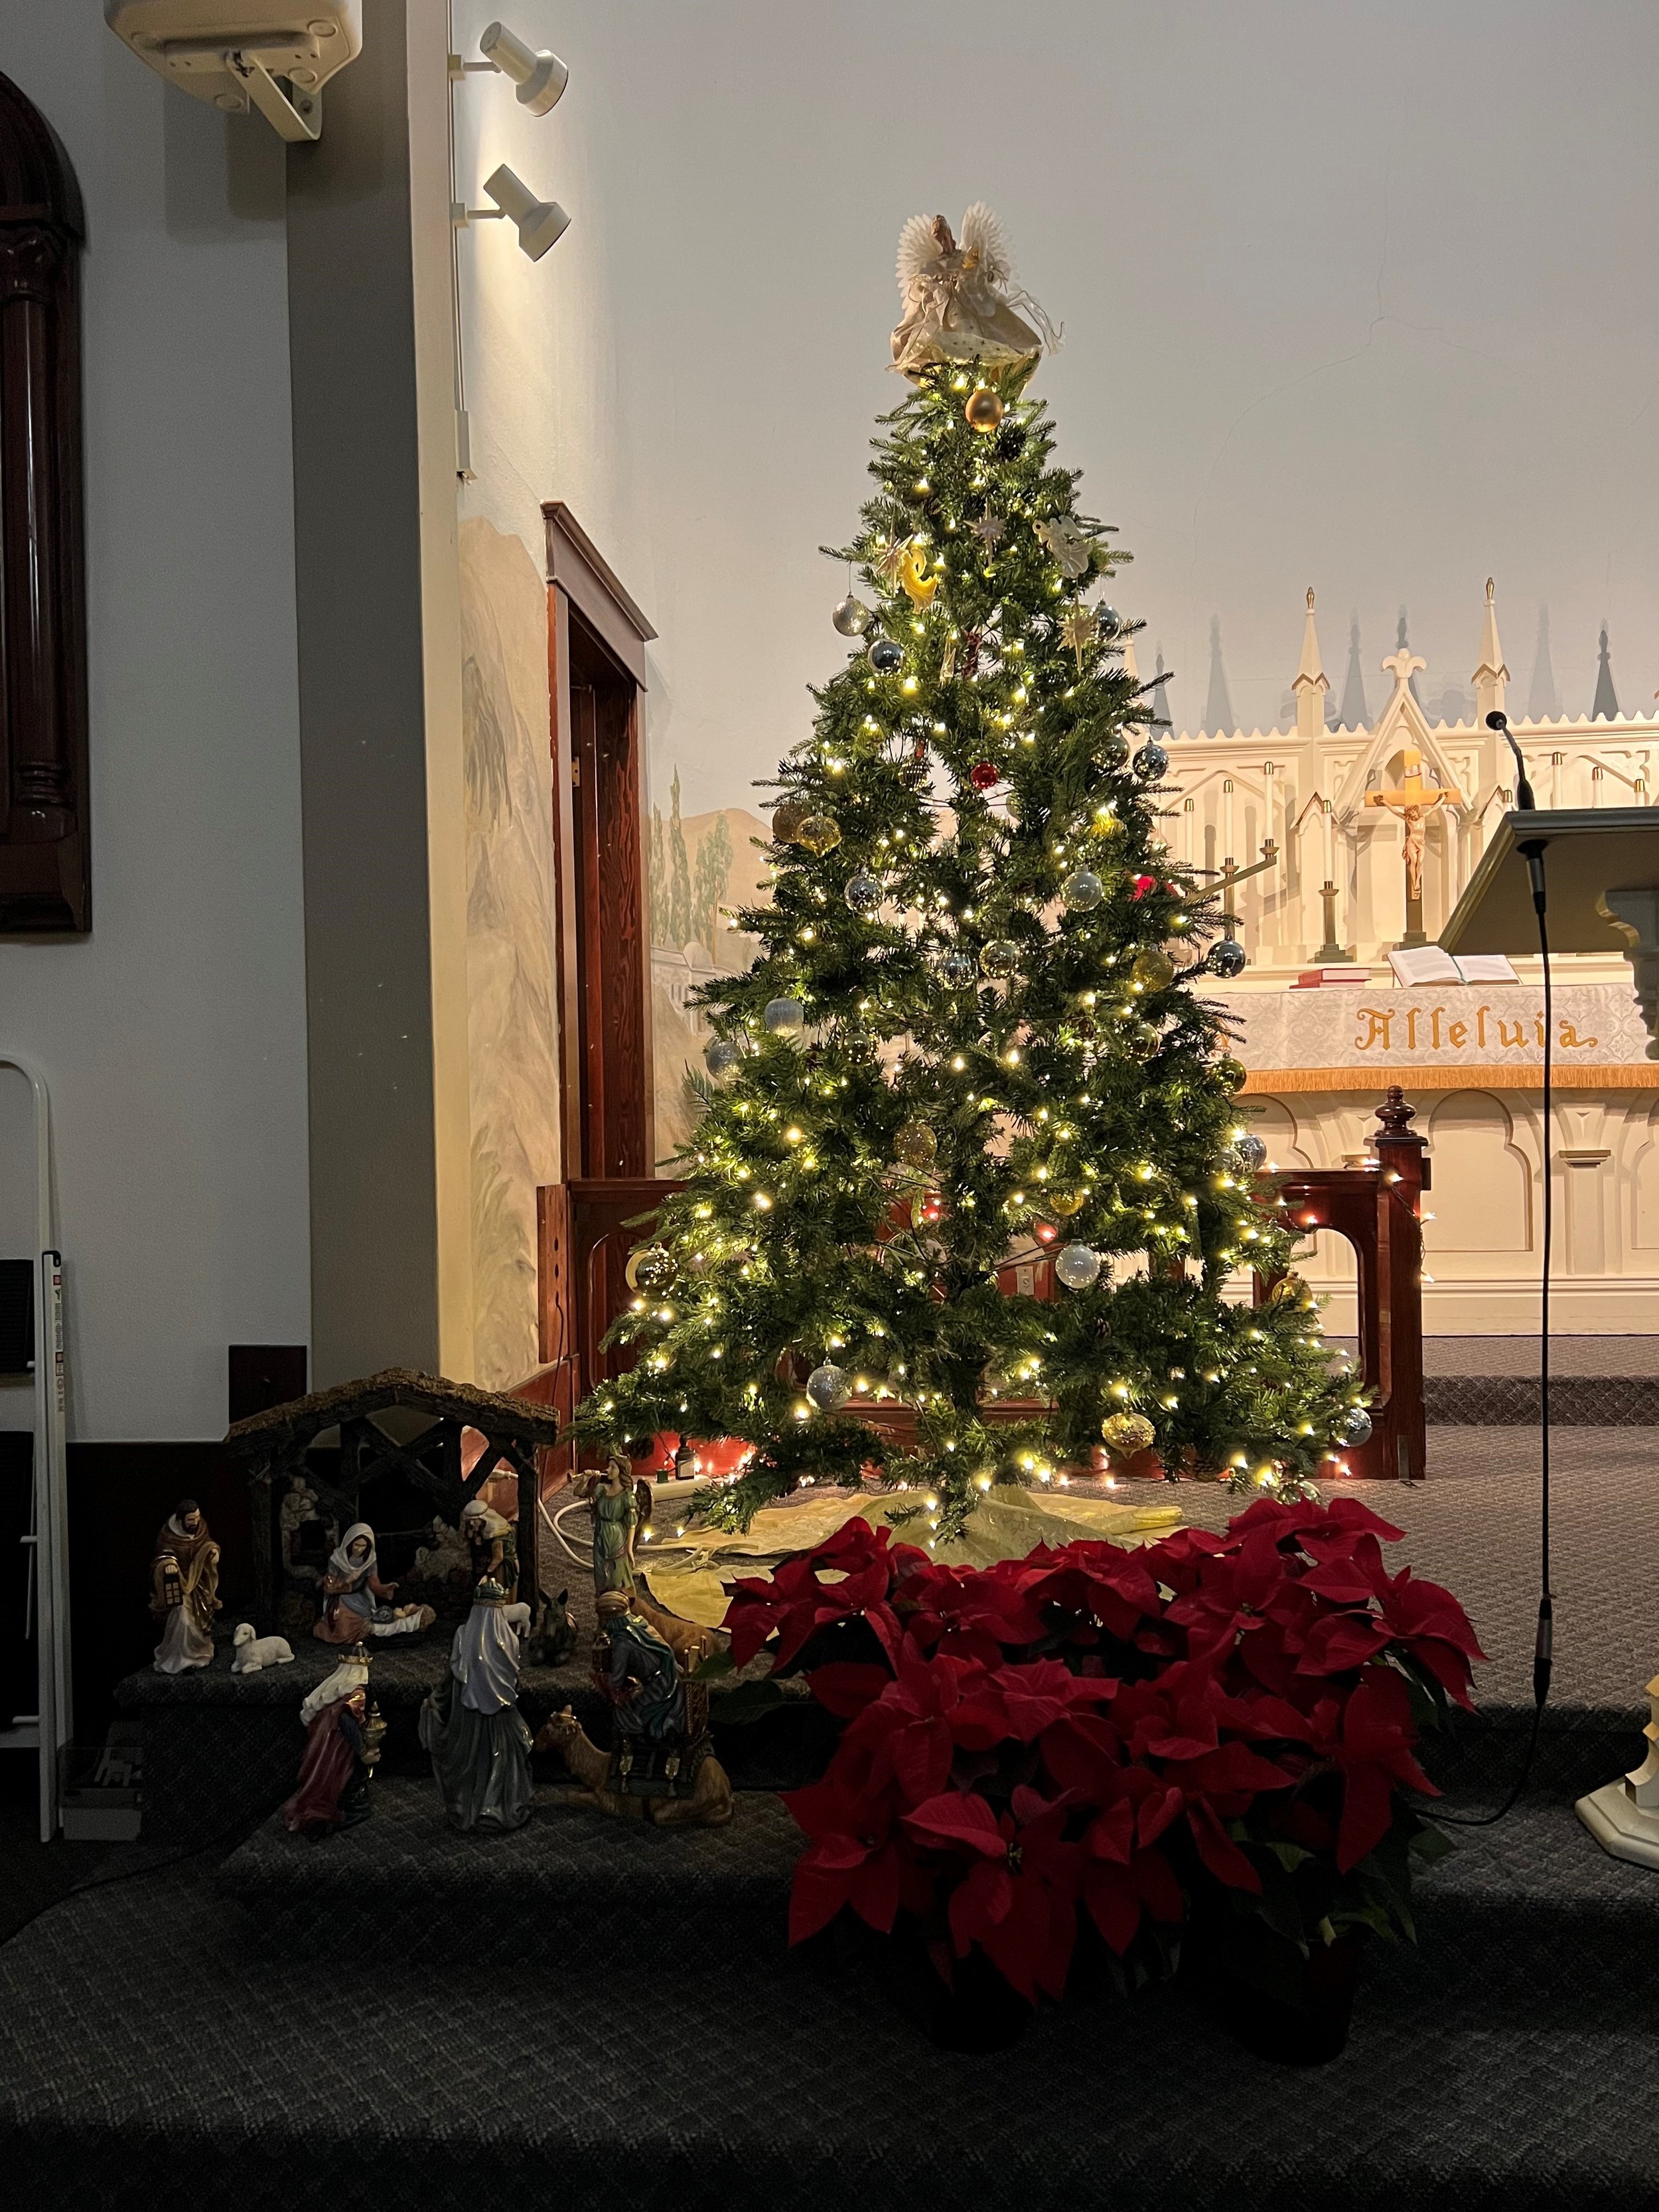 December 25, 2022 - Christmas Day Service